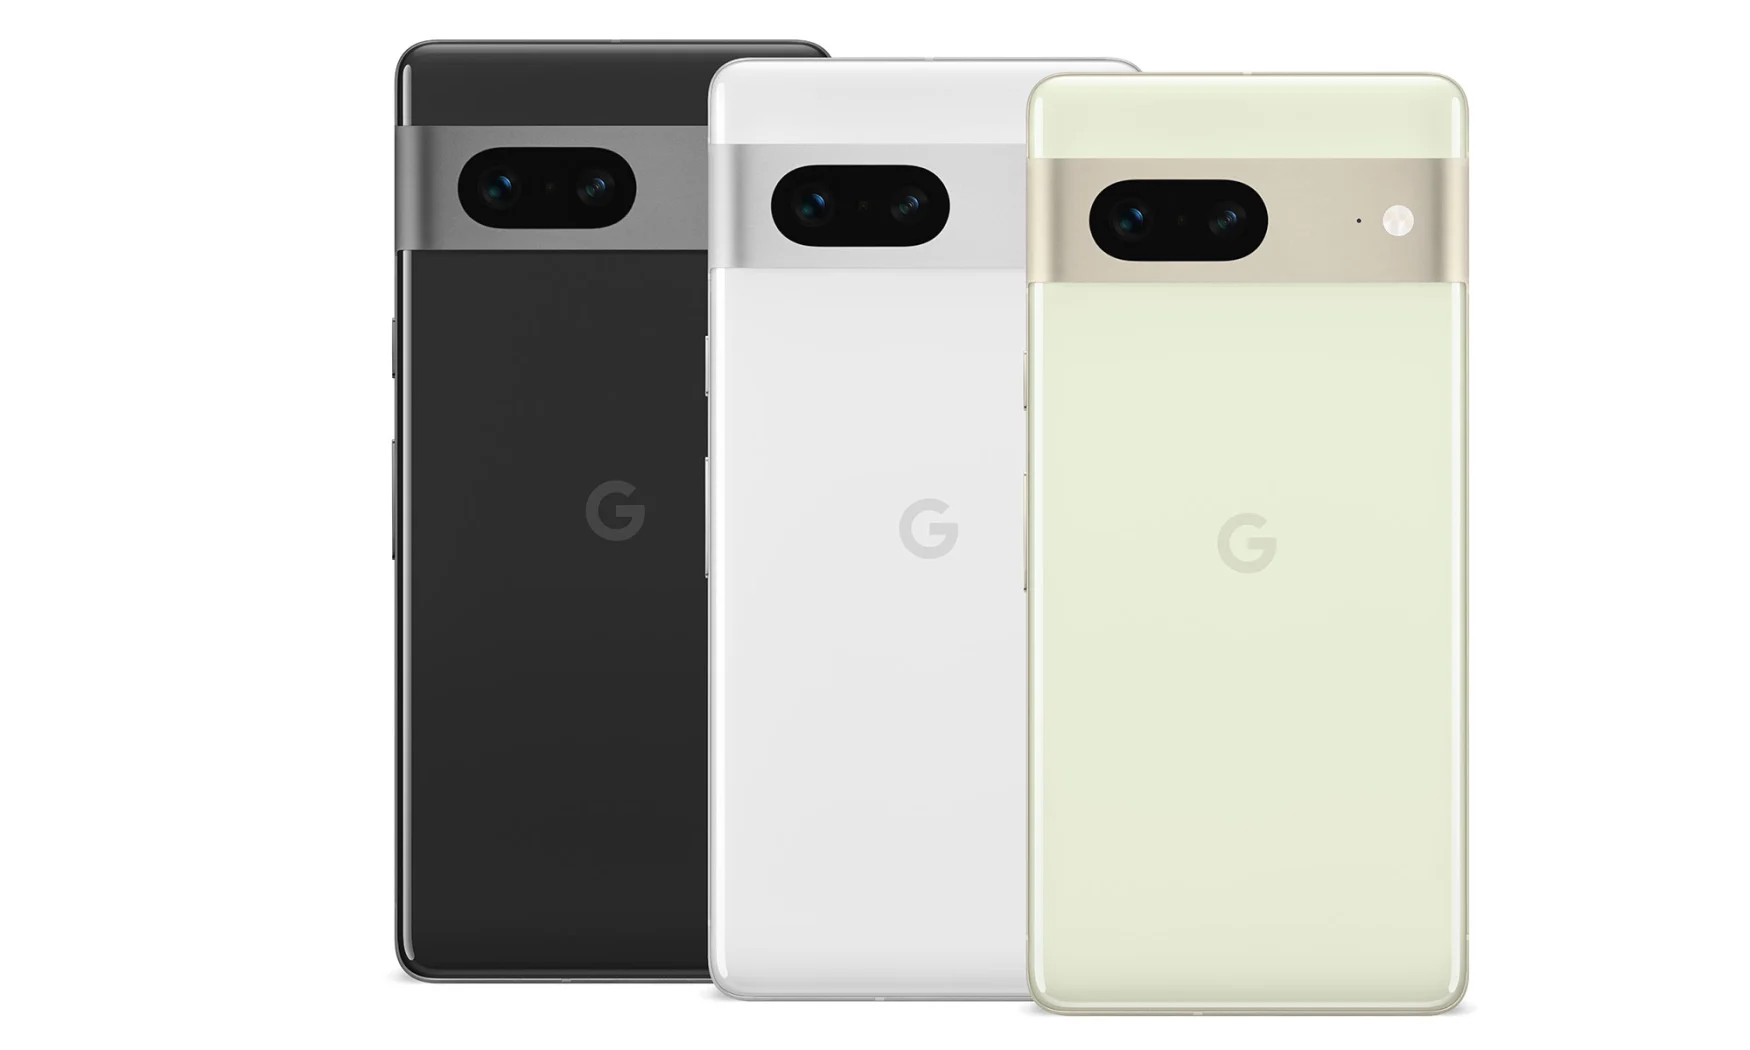 The Pixel 7 will be available in three colors: snow, obsidian and lemongrass